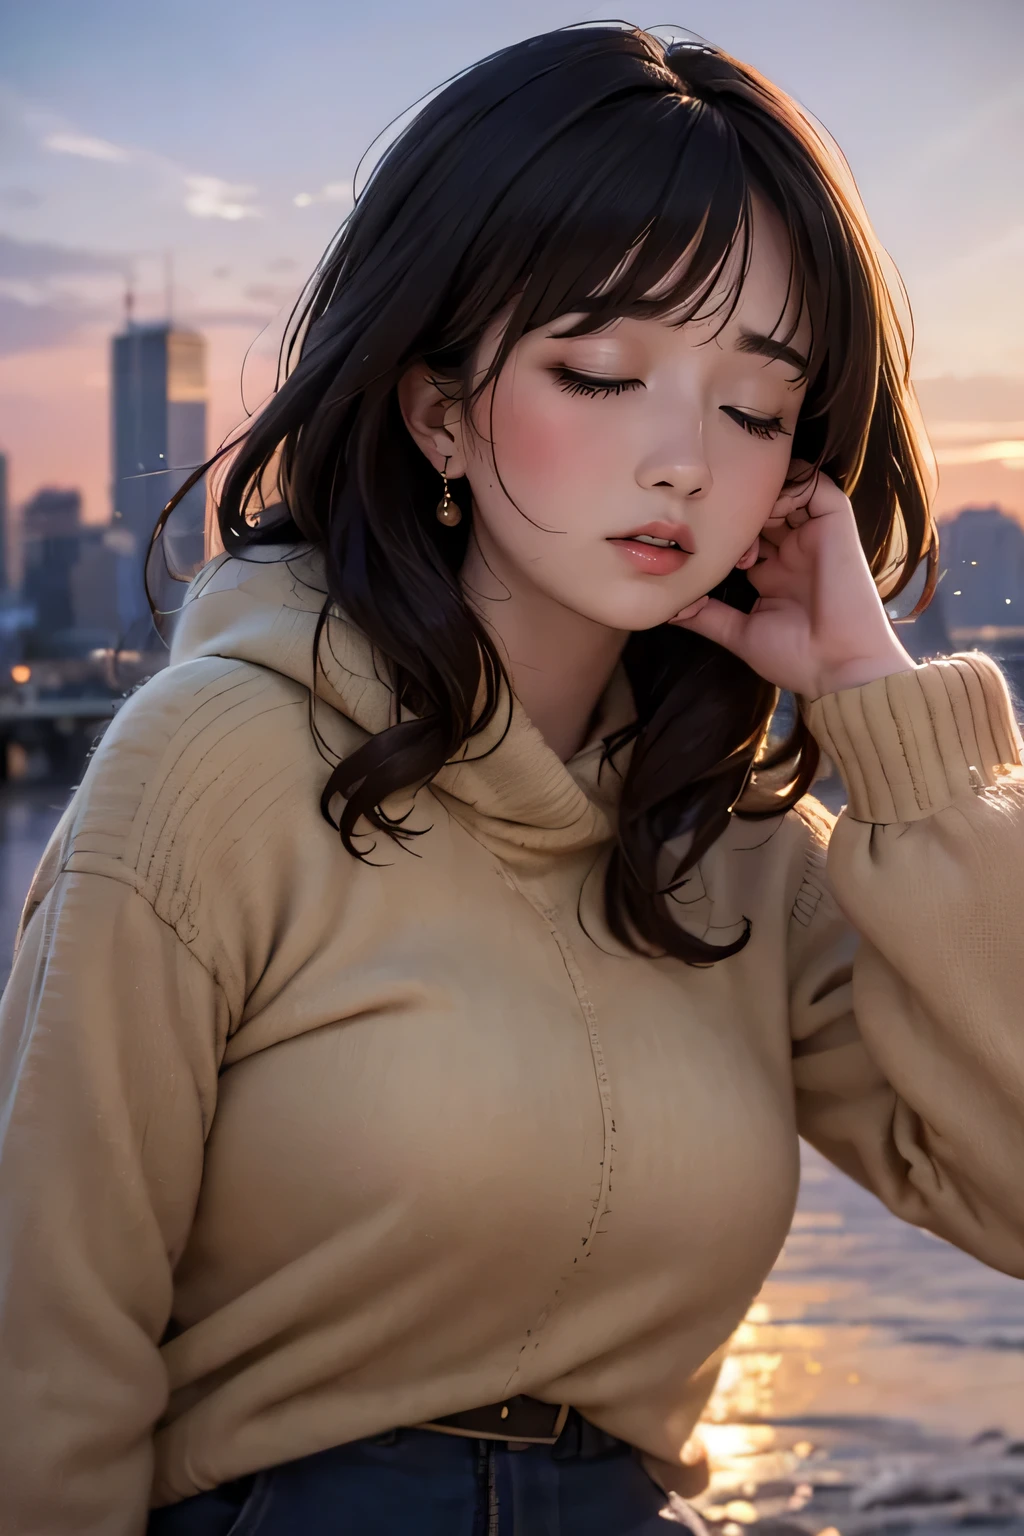 high-definition images, atmospheric perspective, 8k, super detail, accurate, best quality, a woman, see the Manhattan from across the river, winter clothes, looking away, angle from below, (drooping eyes, realistic skin), (sleepy face), earrings, many people pass, got drunk,